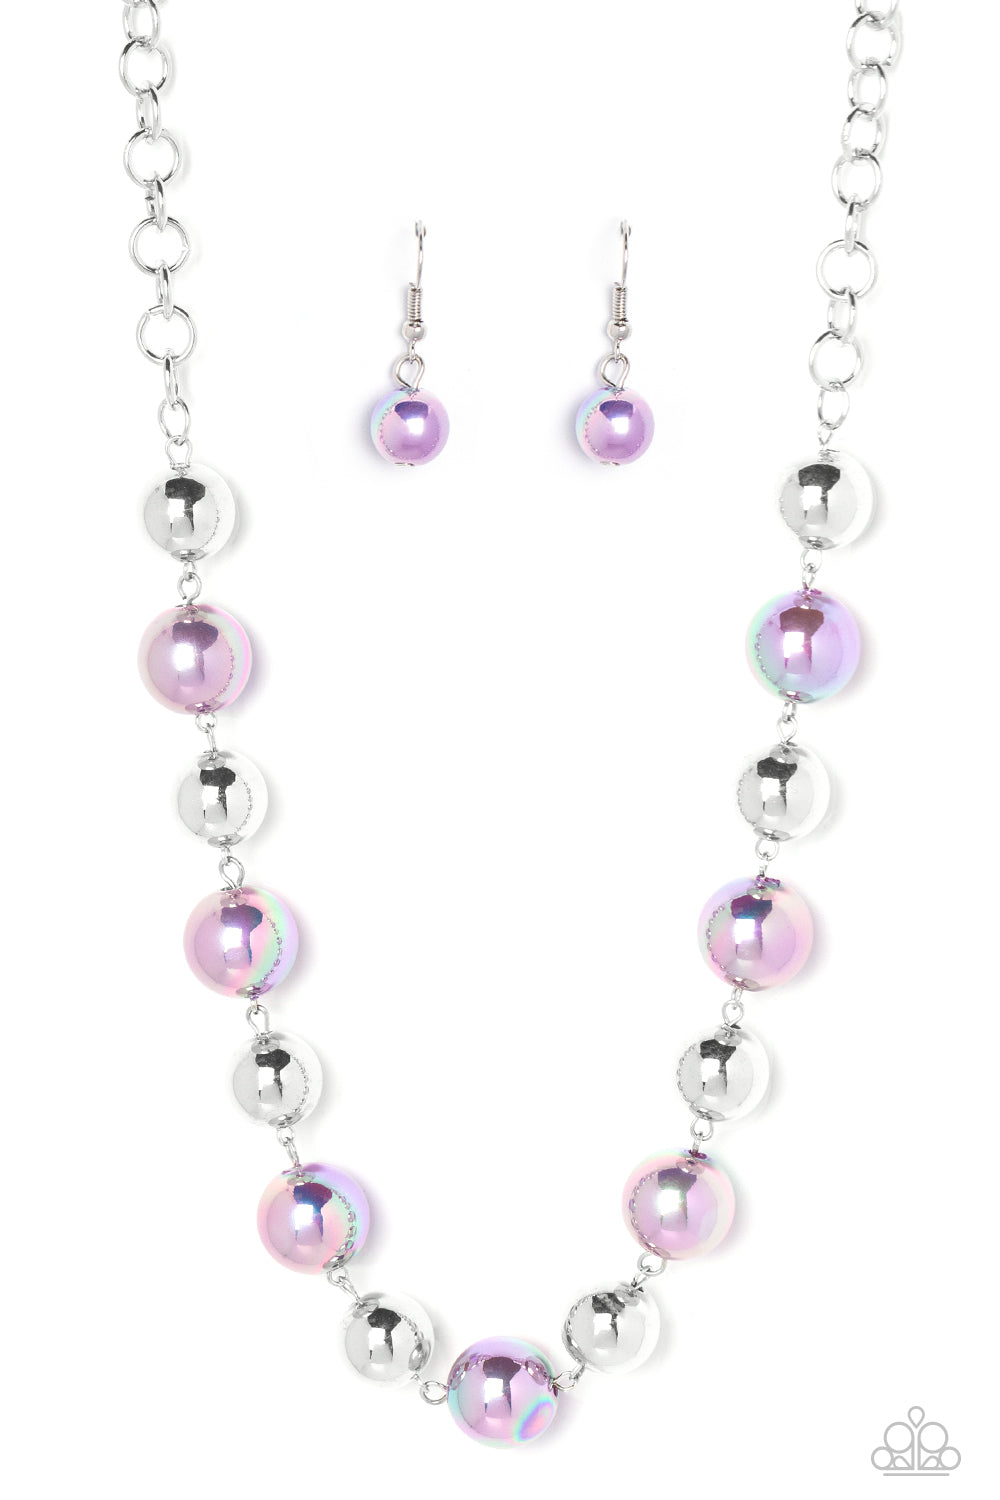 Dreamscape Escape - Purple Iridescent Necklaces dipped in an iridescent finish, oversized lavender pearls alternate with shiny silver beads below the collar for a dreamy pop of shimmer. Features an adjustable clasp closure.  Sold as one individual necklace. Includes one pair of matching earrings.